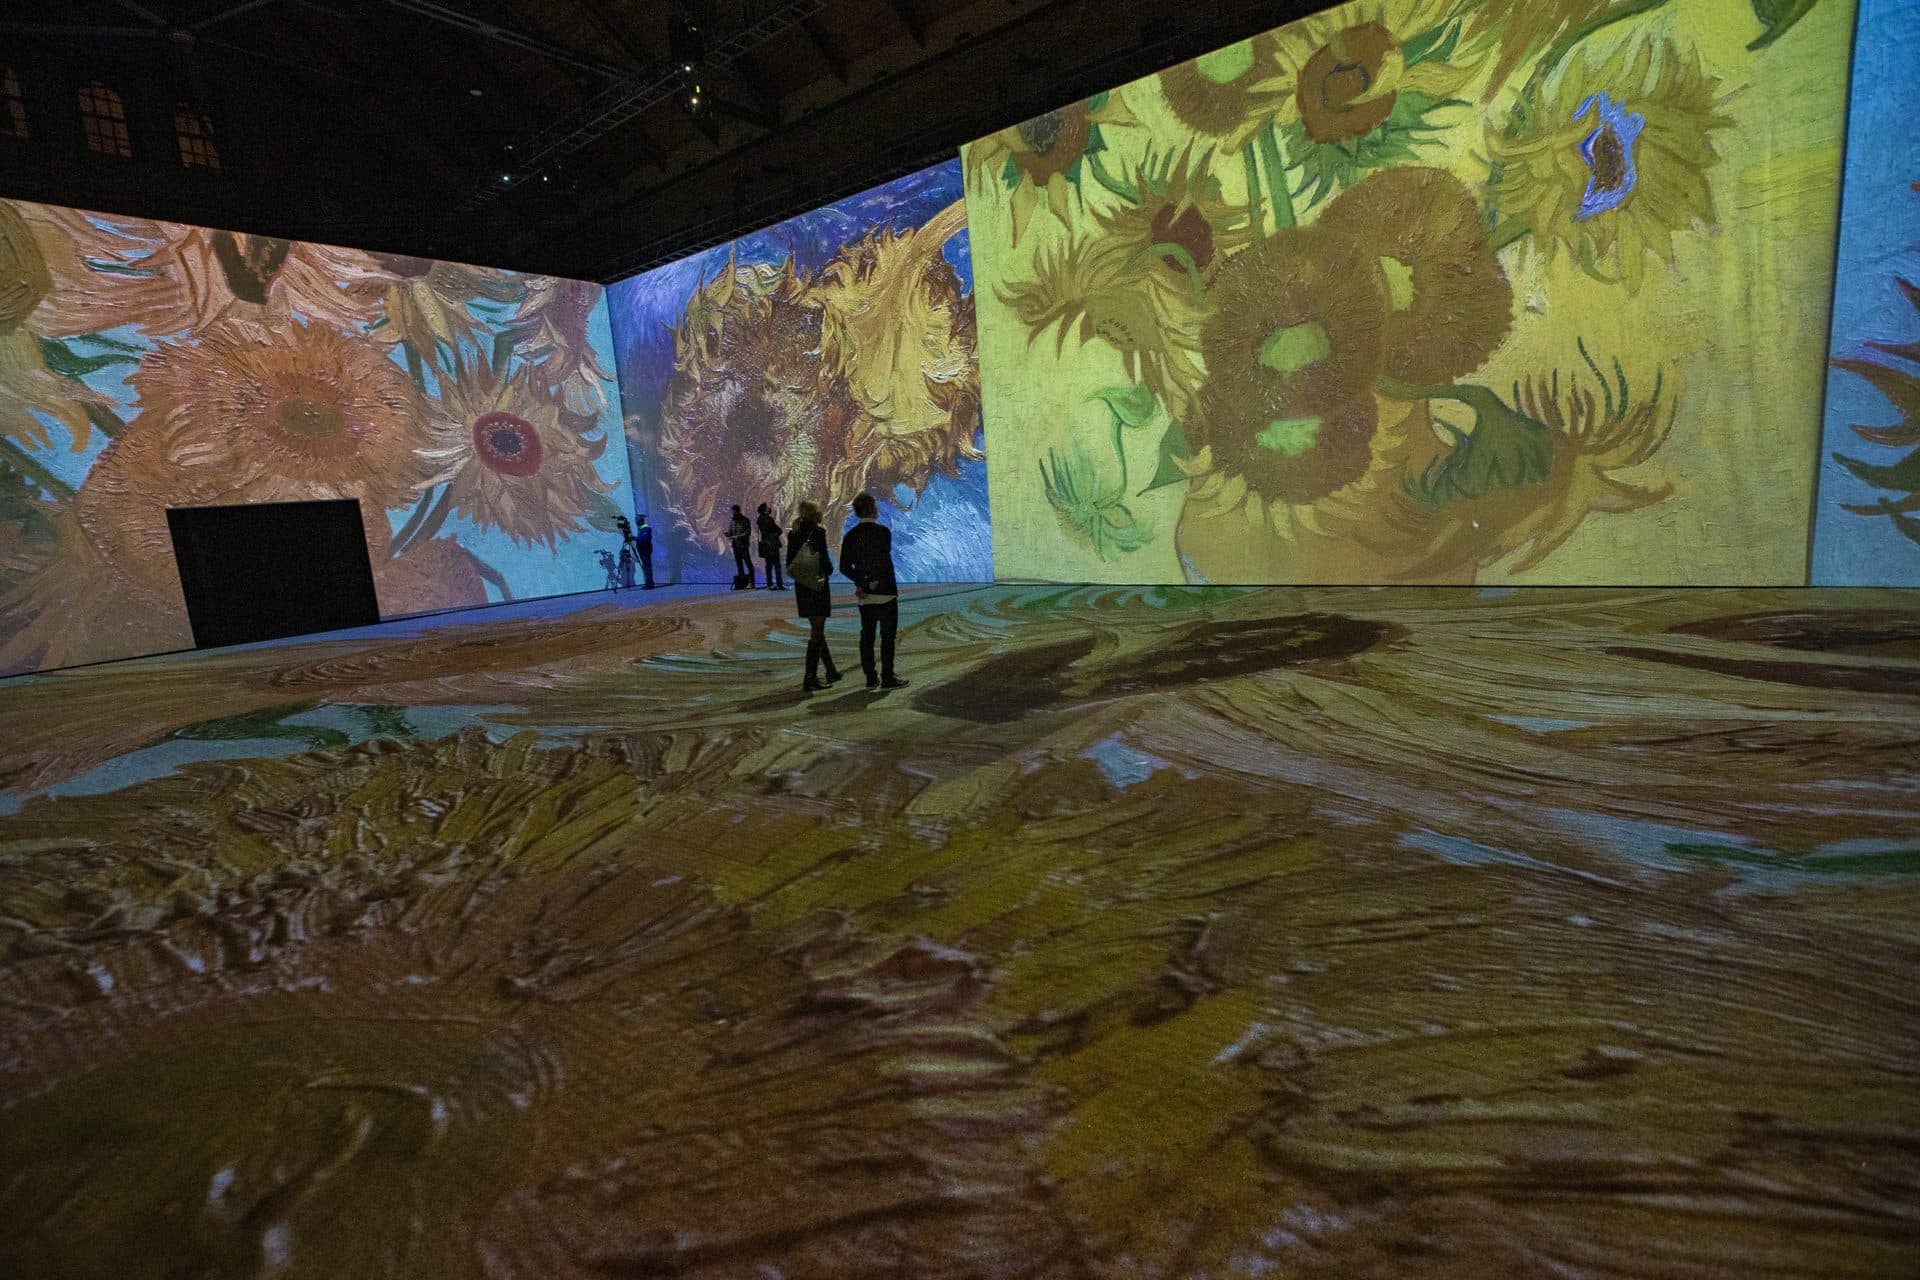 Vincent van Gogh’s "Sunflowers" projected onto the walls and floor during a press preview of "Imagine Van Gogh" at the SoWa Power Station in the South End. (Jesse Costa/WBUR)